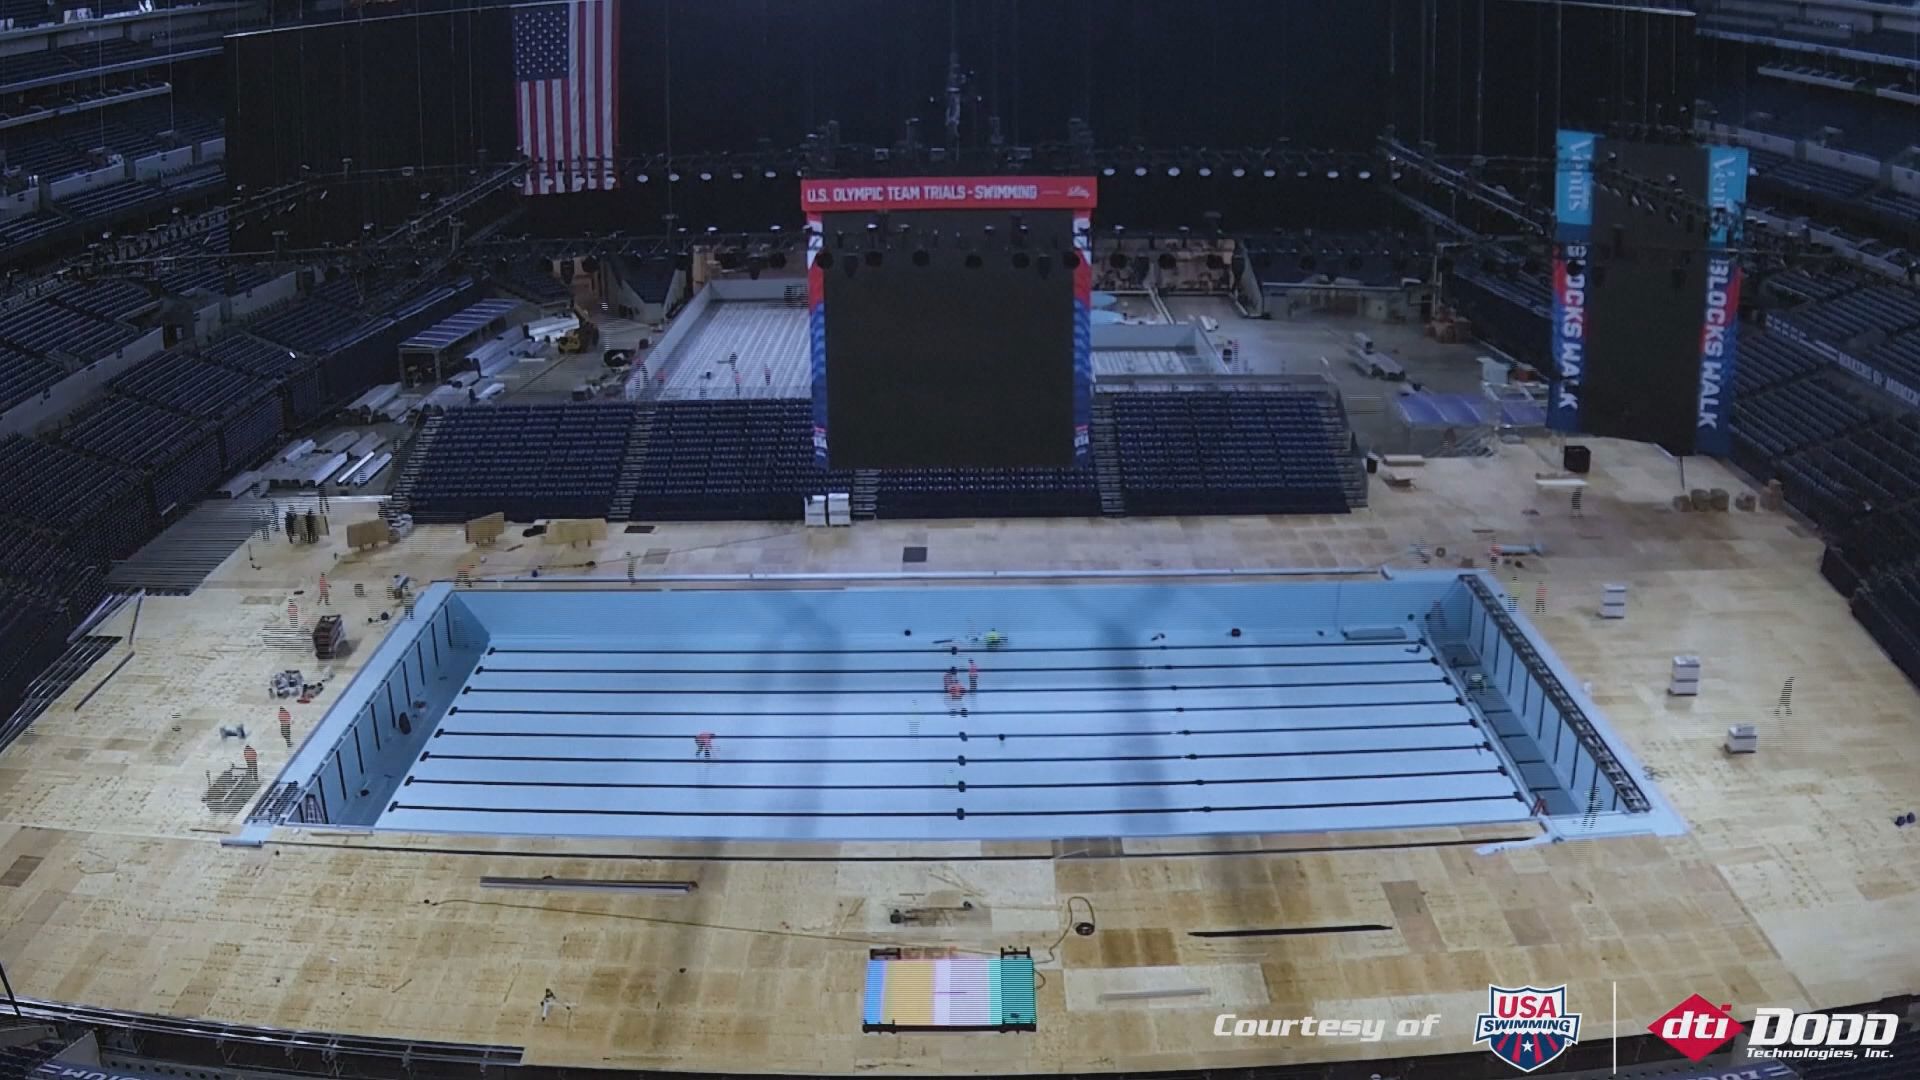 For the first time, the US Olympic Trials will be held inside an NFL stadium. Video courtesy of NBC.